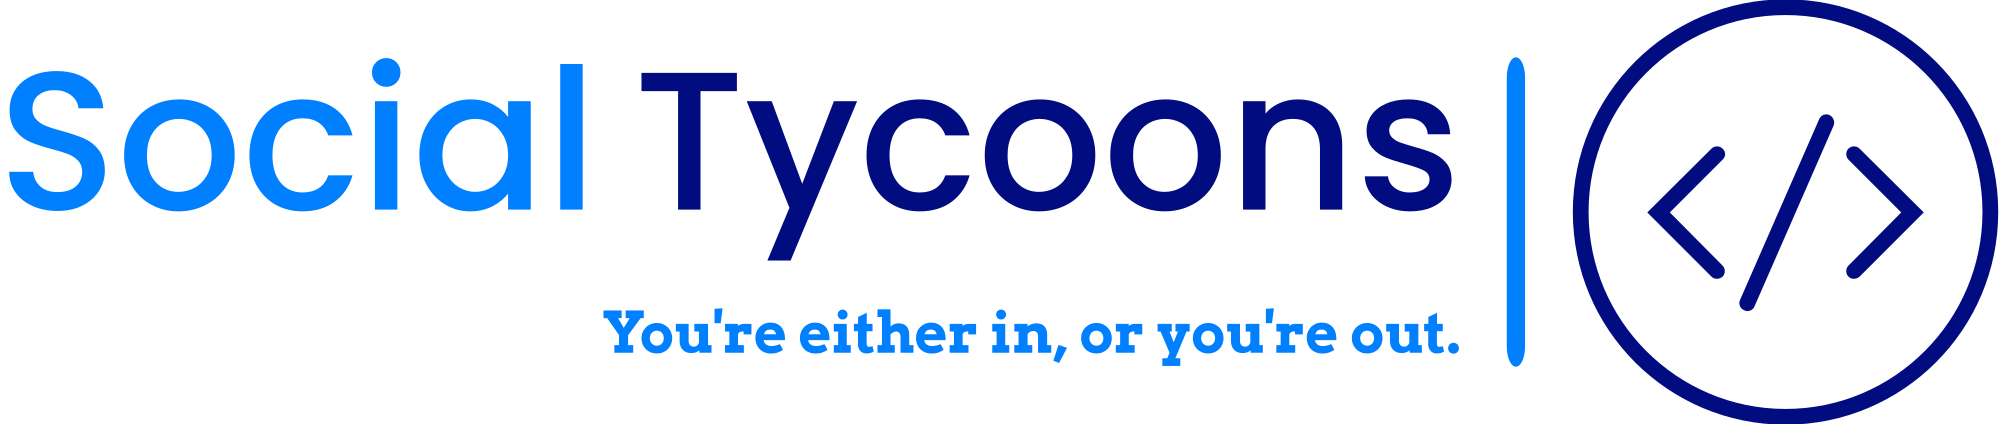 Social Tycoons